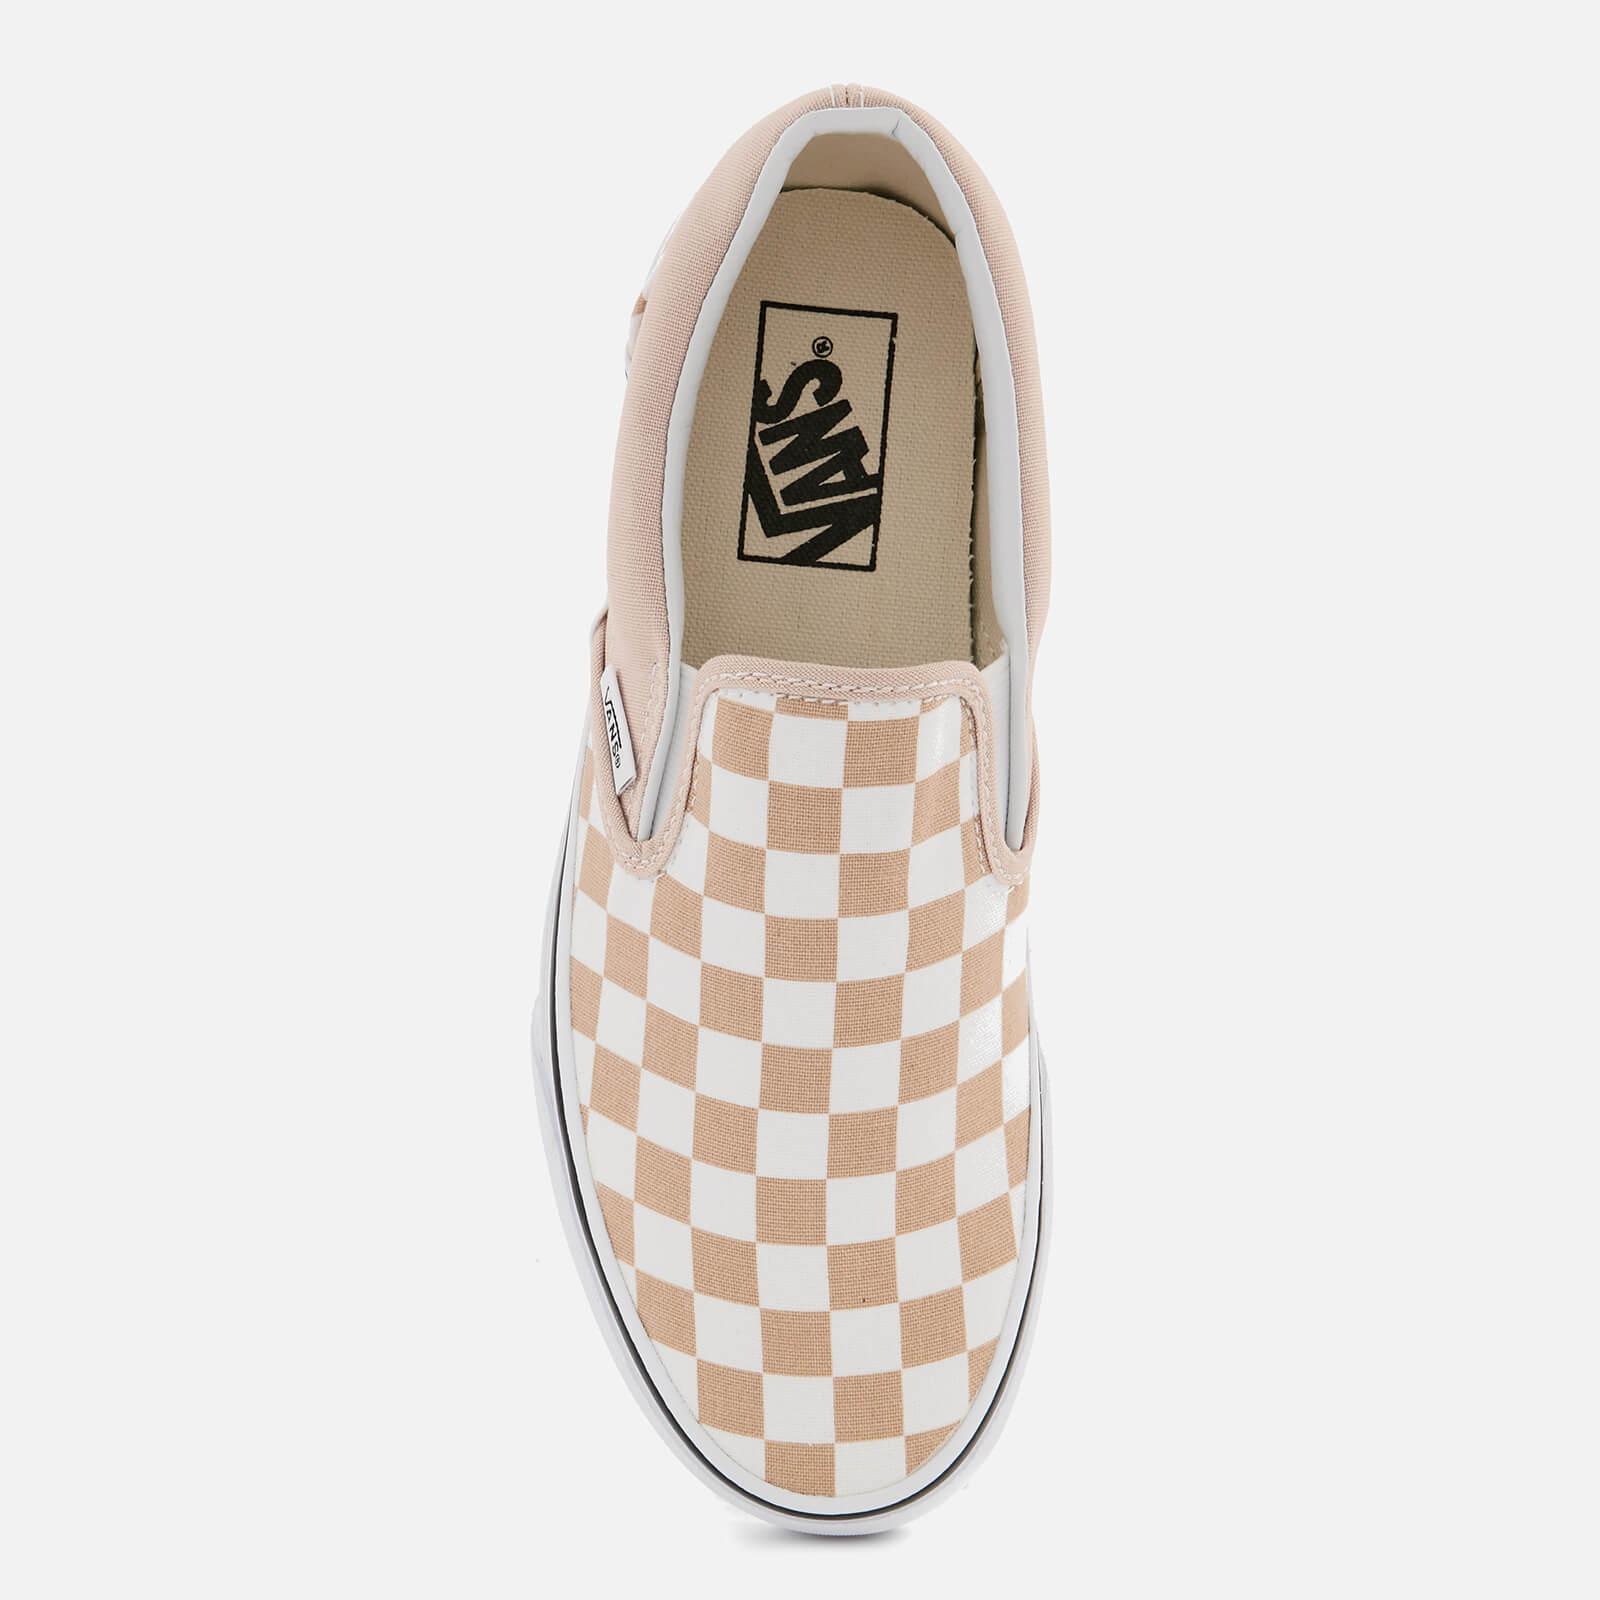 Vans Checkerboard Classic Slip-on Trainers in Natural | Lyst